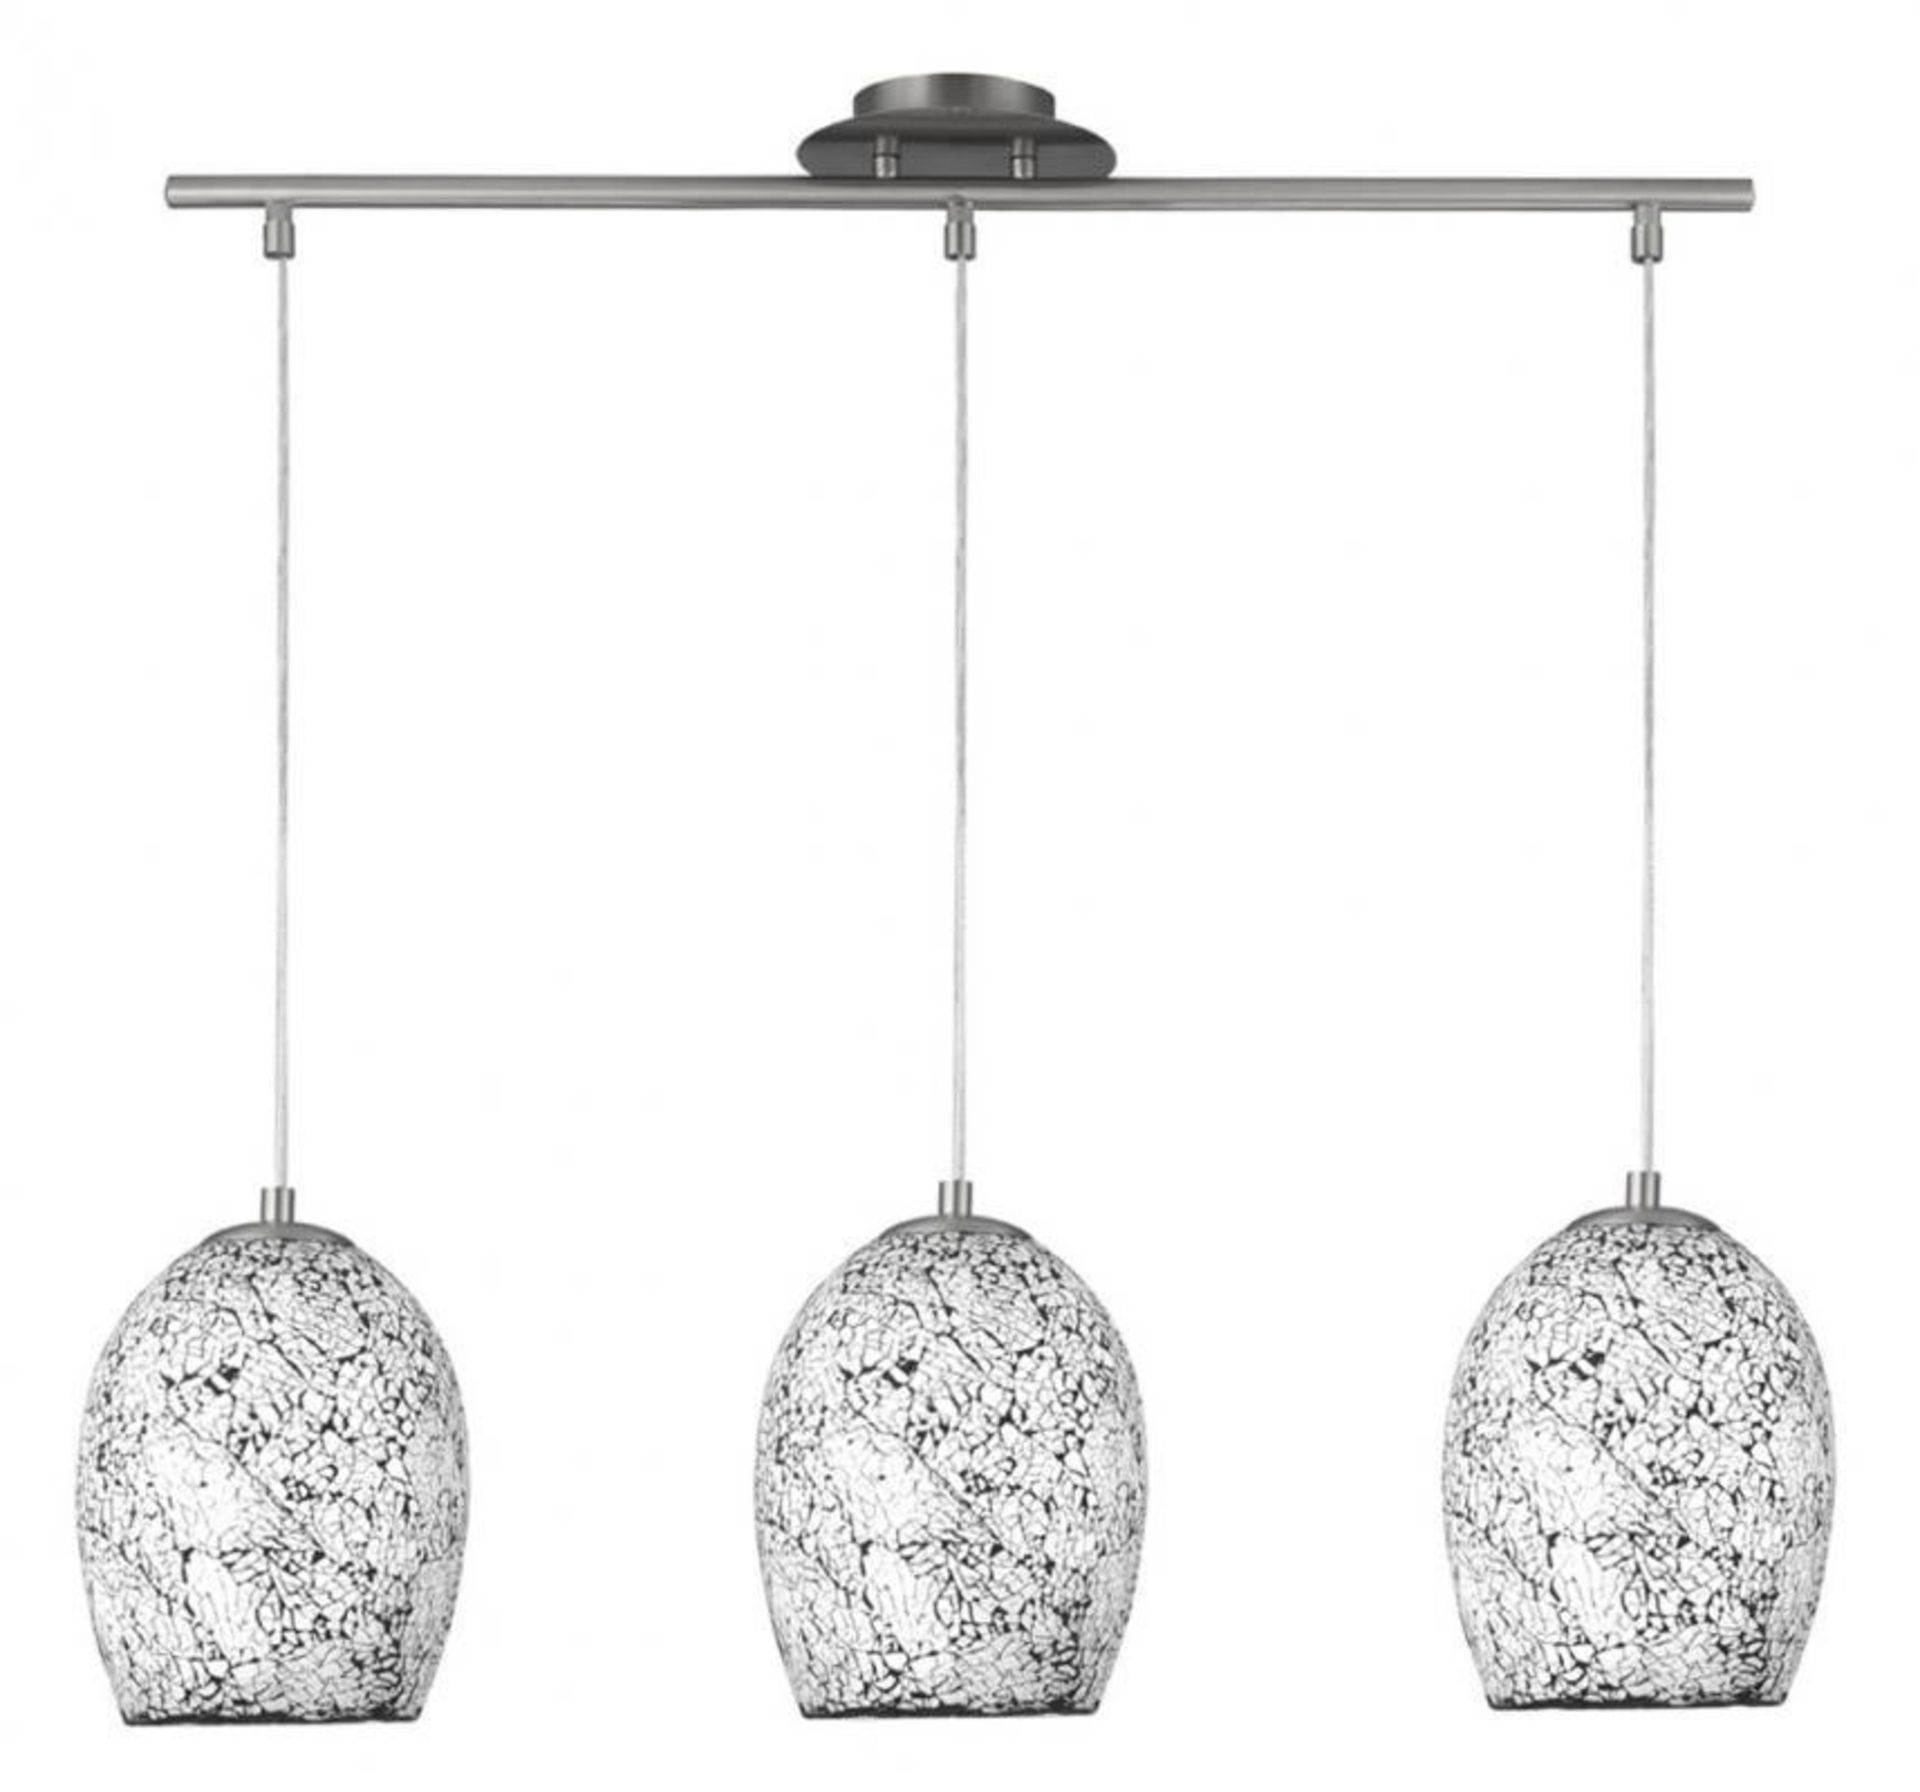 1 x Crackle White Mosaic Glass 3 Light Fitting With Dome Shades and Satin Silver Trim - Ex Display S